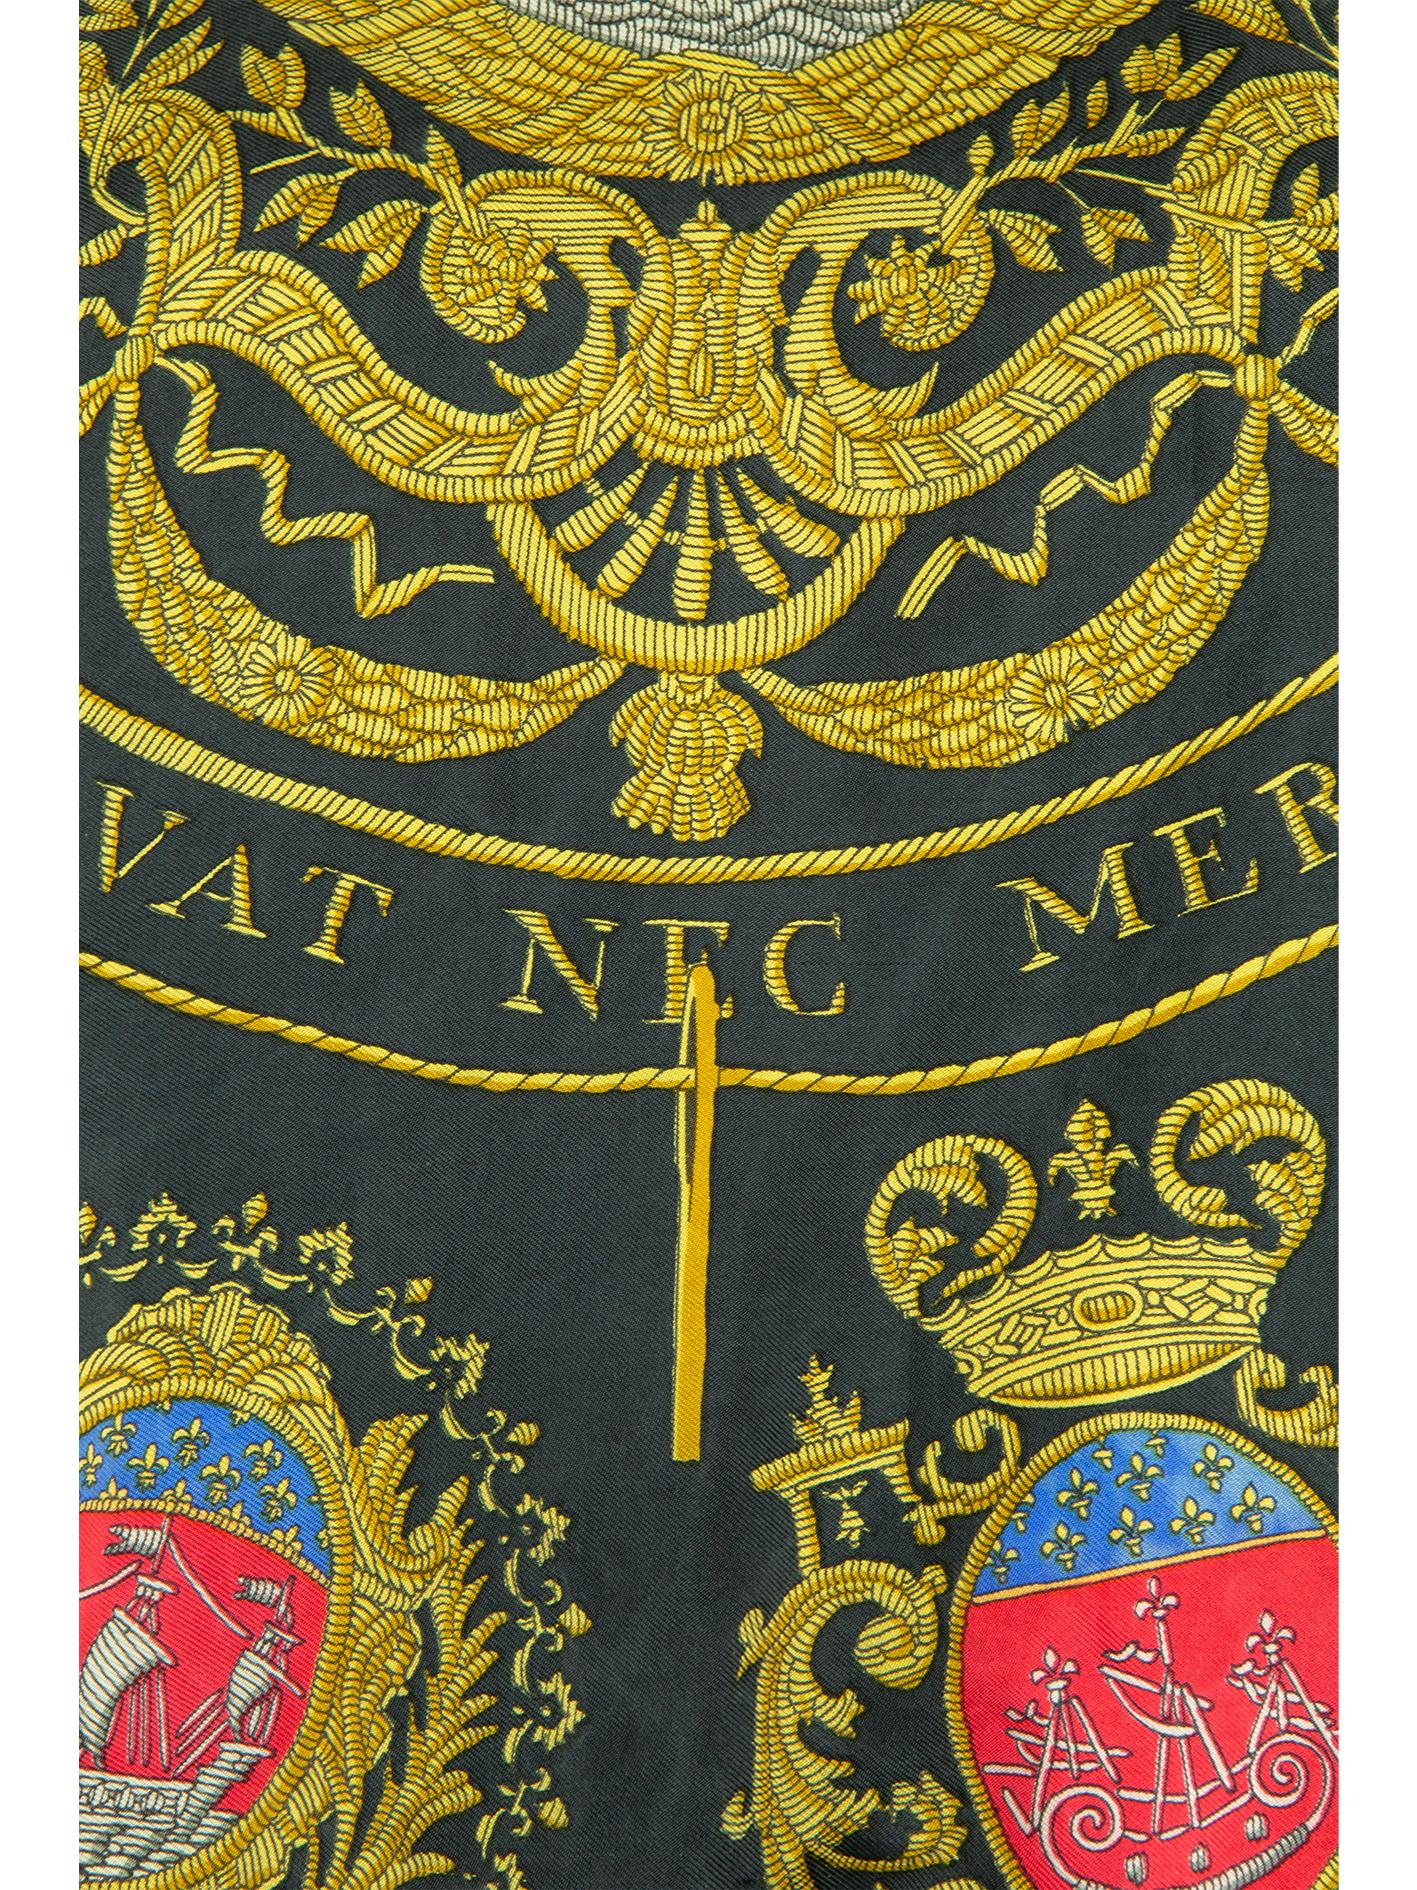 A 1970s Hermès sweater with a silk printed panel at the front. This panel features a ship towards the top; with the words “ Fluctuat Nec Mergitur”, which translates to (